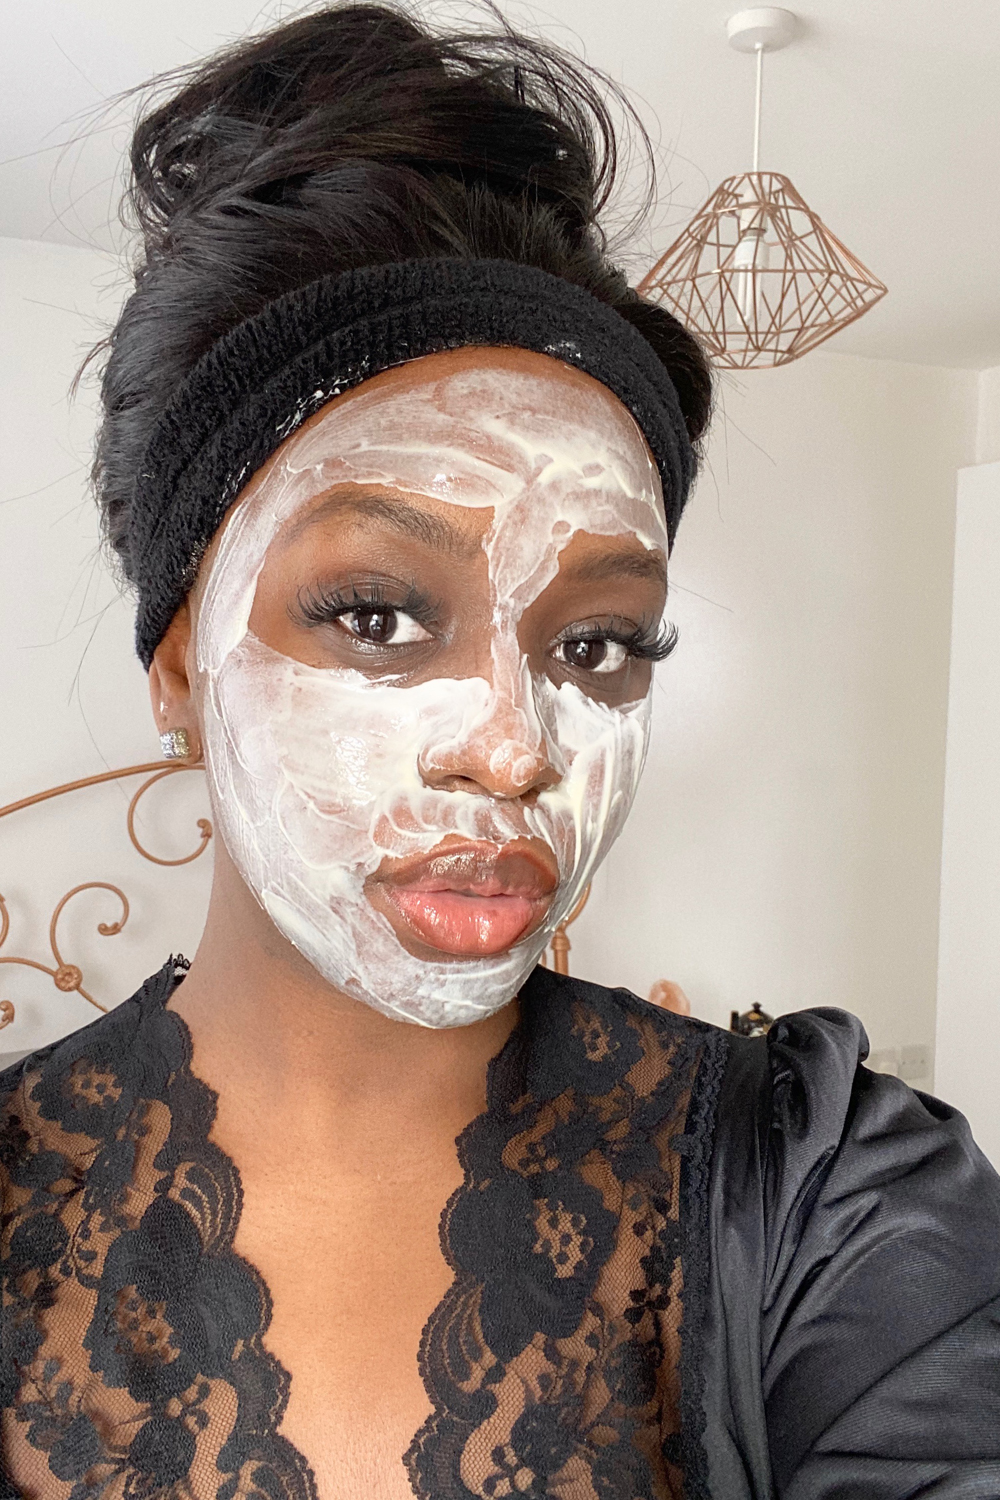 I Just Tried All of the Face Masks Around–These Are the 22 That I Rate